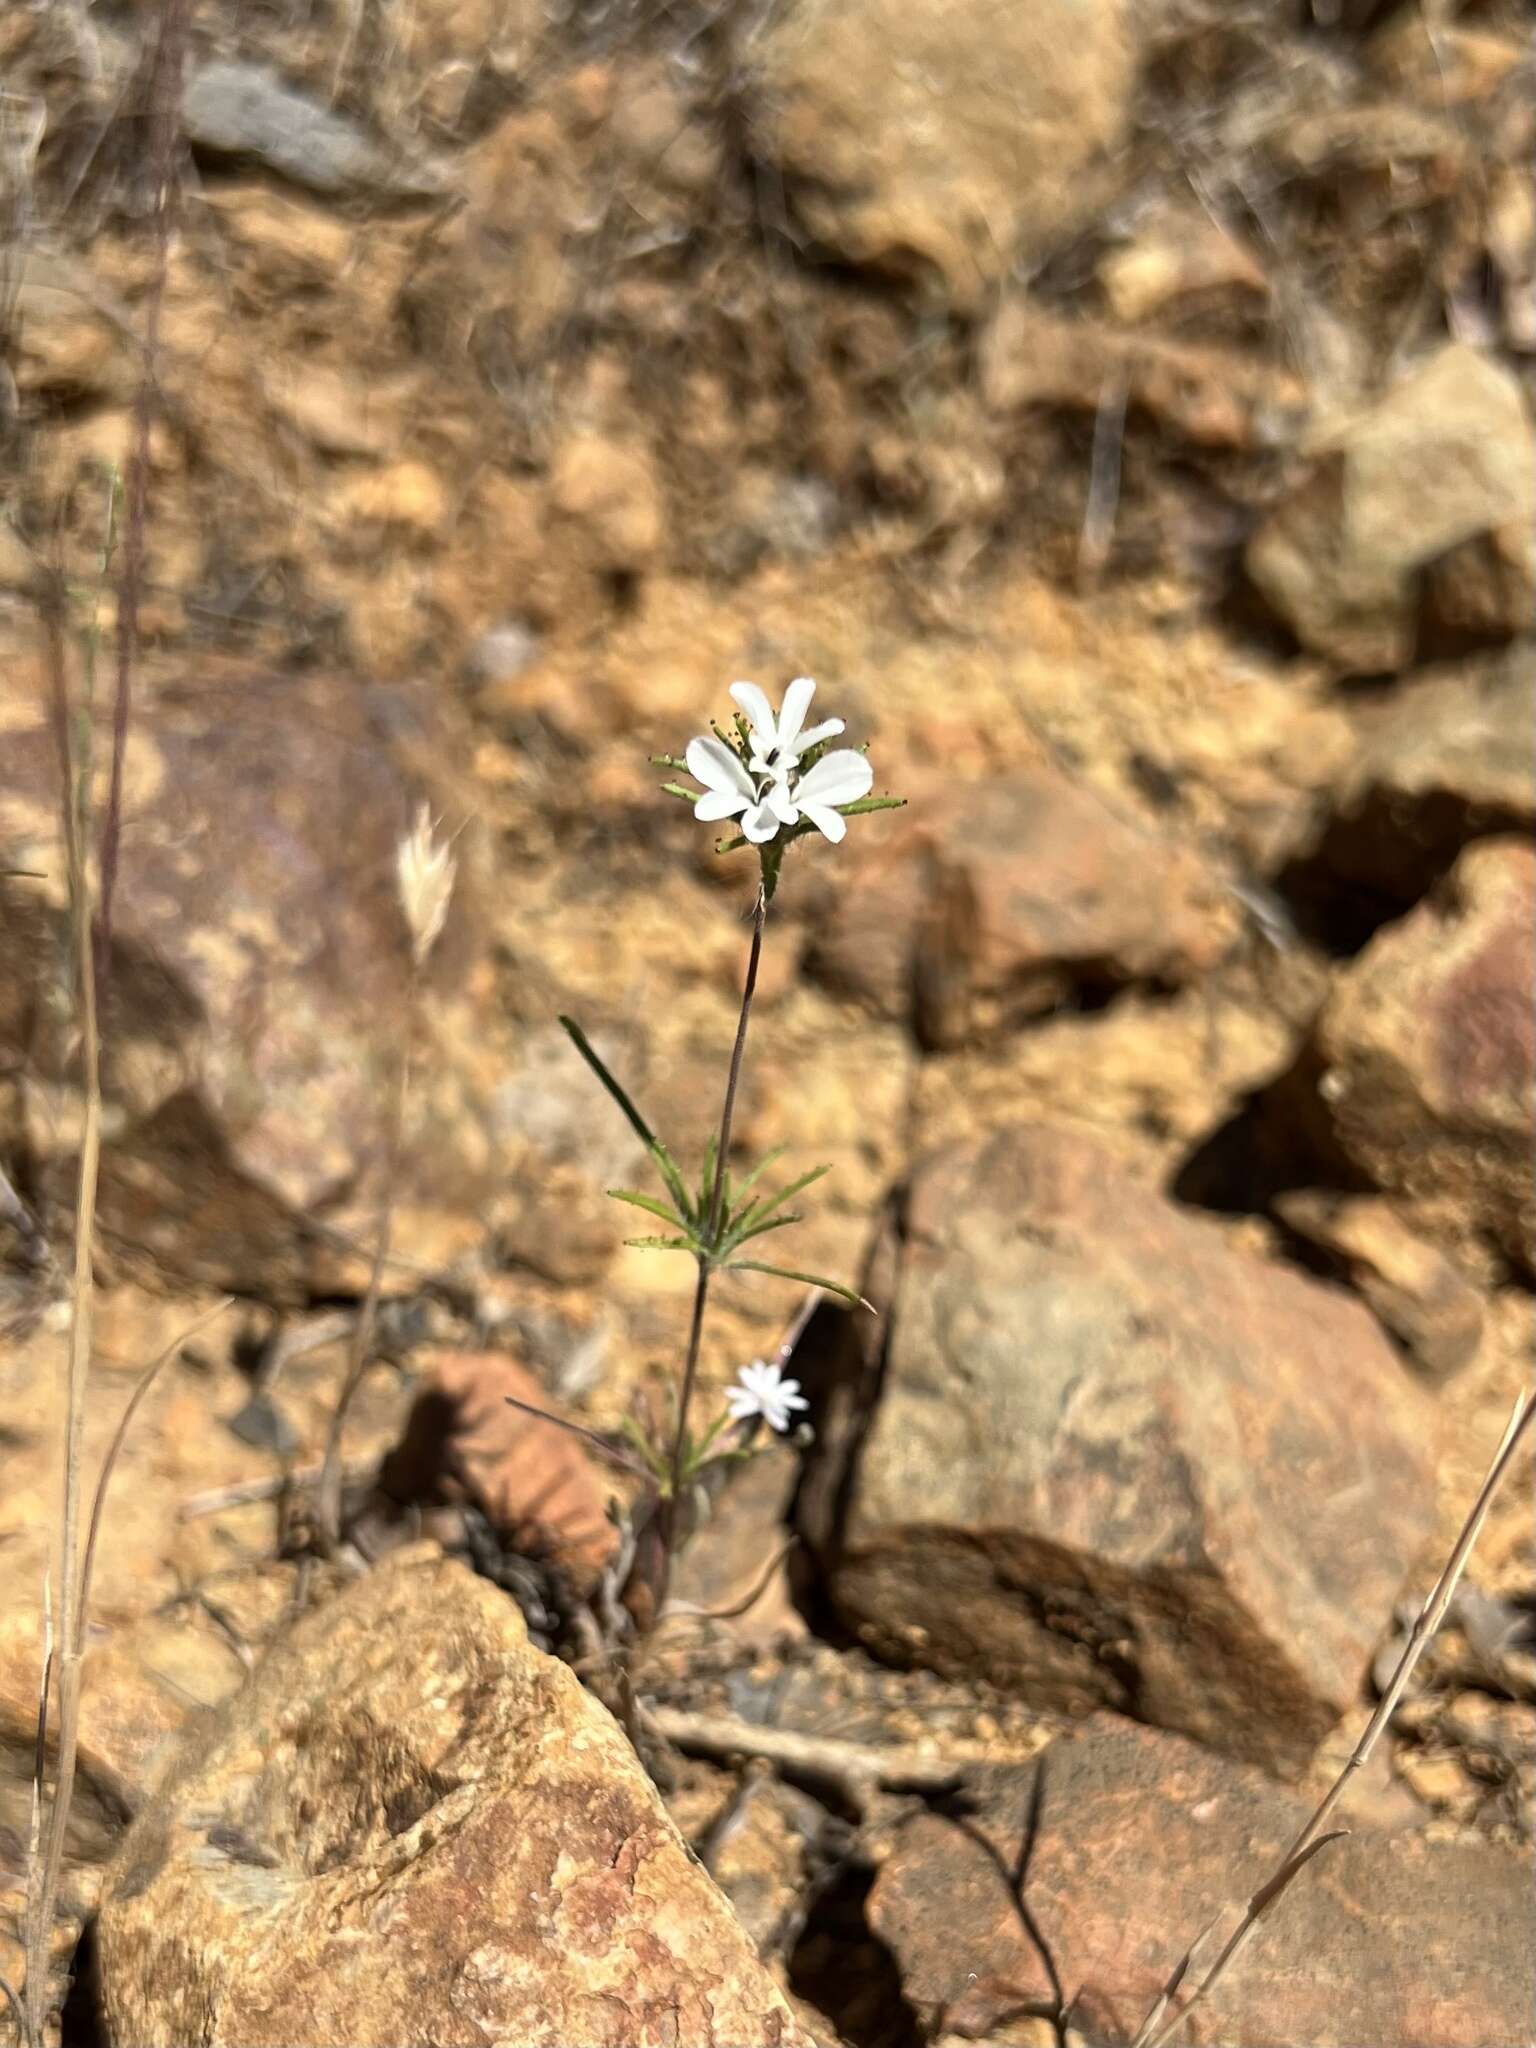 Image of Butte County western rosinweed